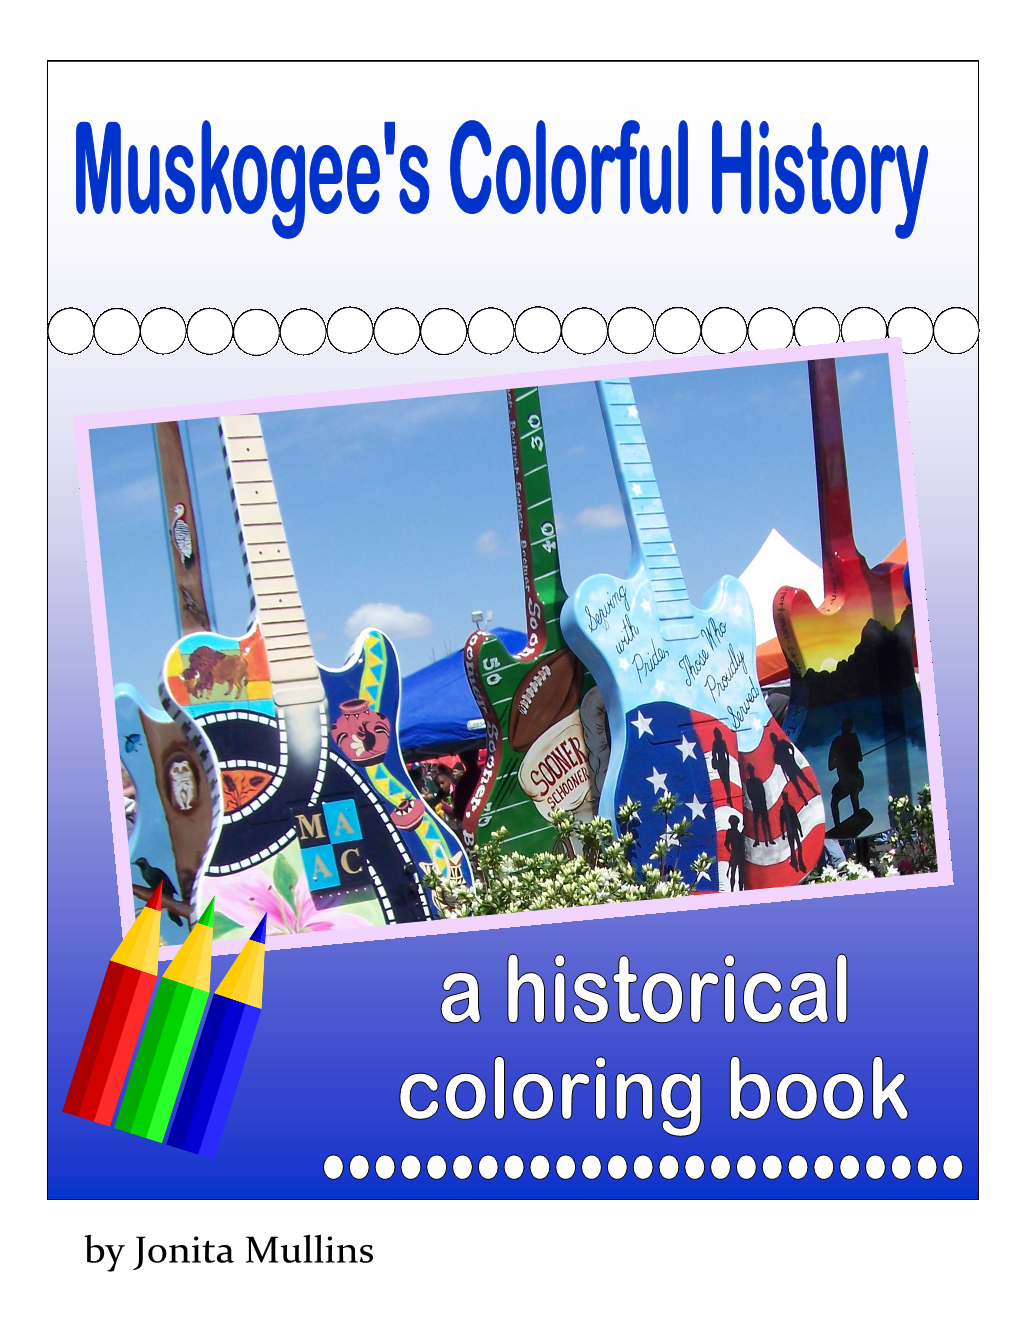 Muskogee's Colorful History Coloring Book